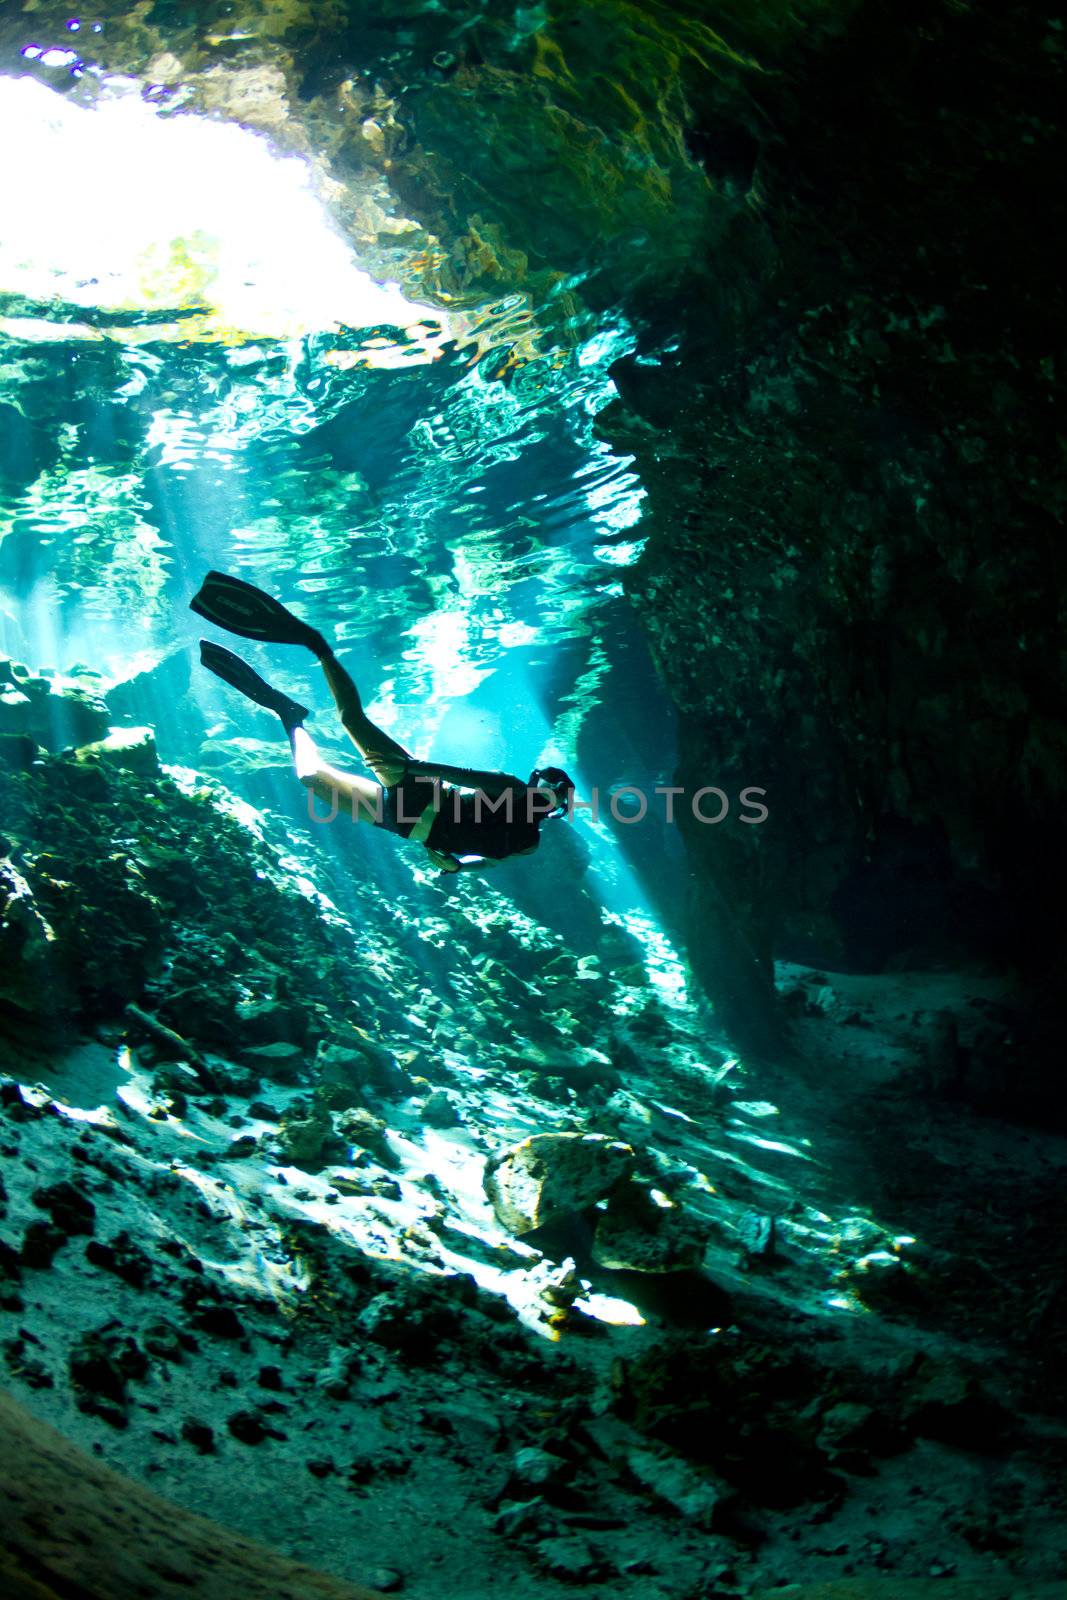 A young woman free dives into a Cenote